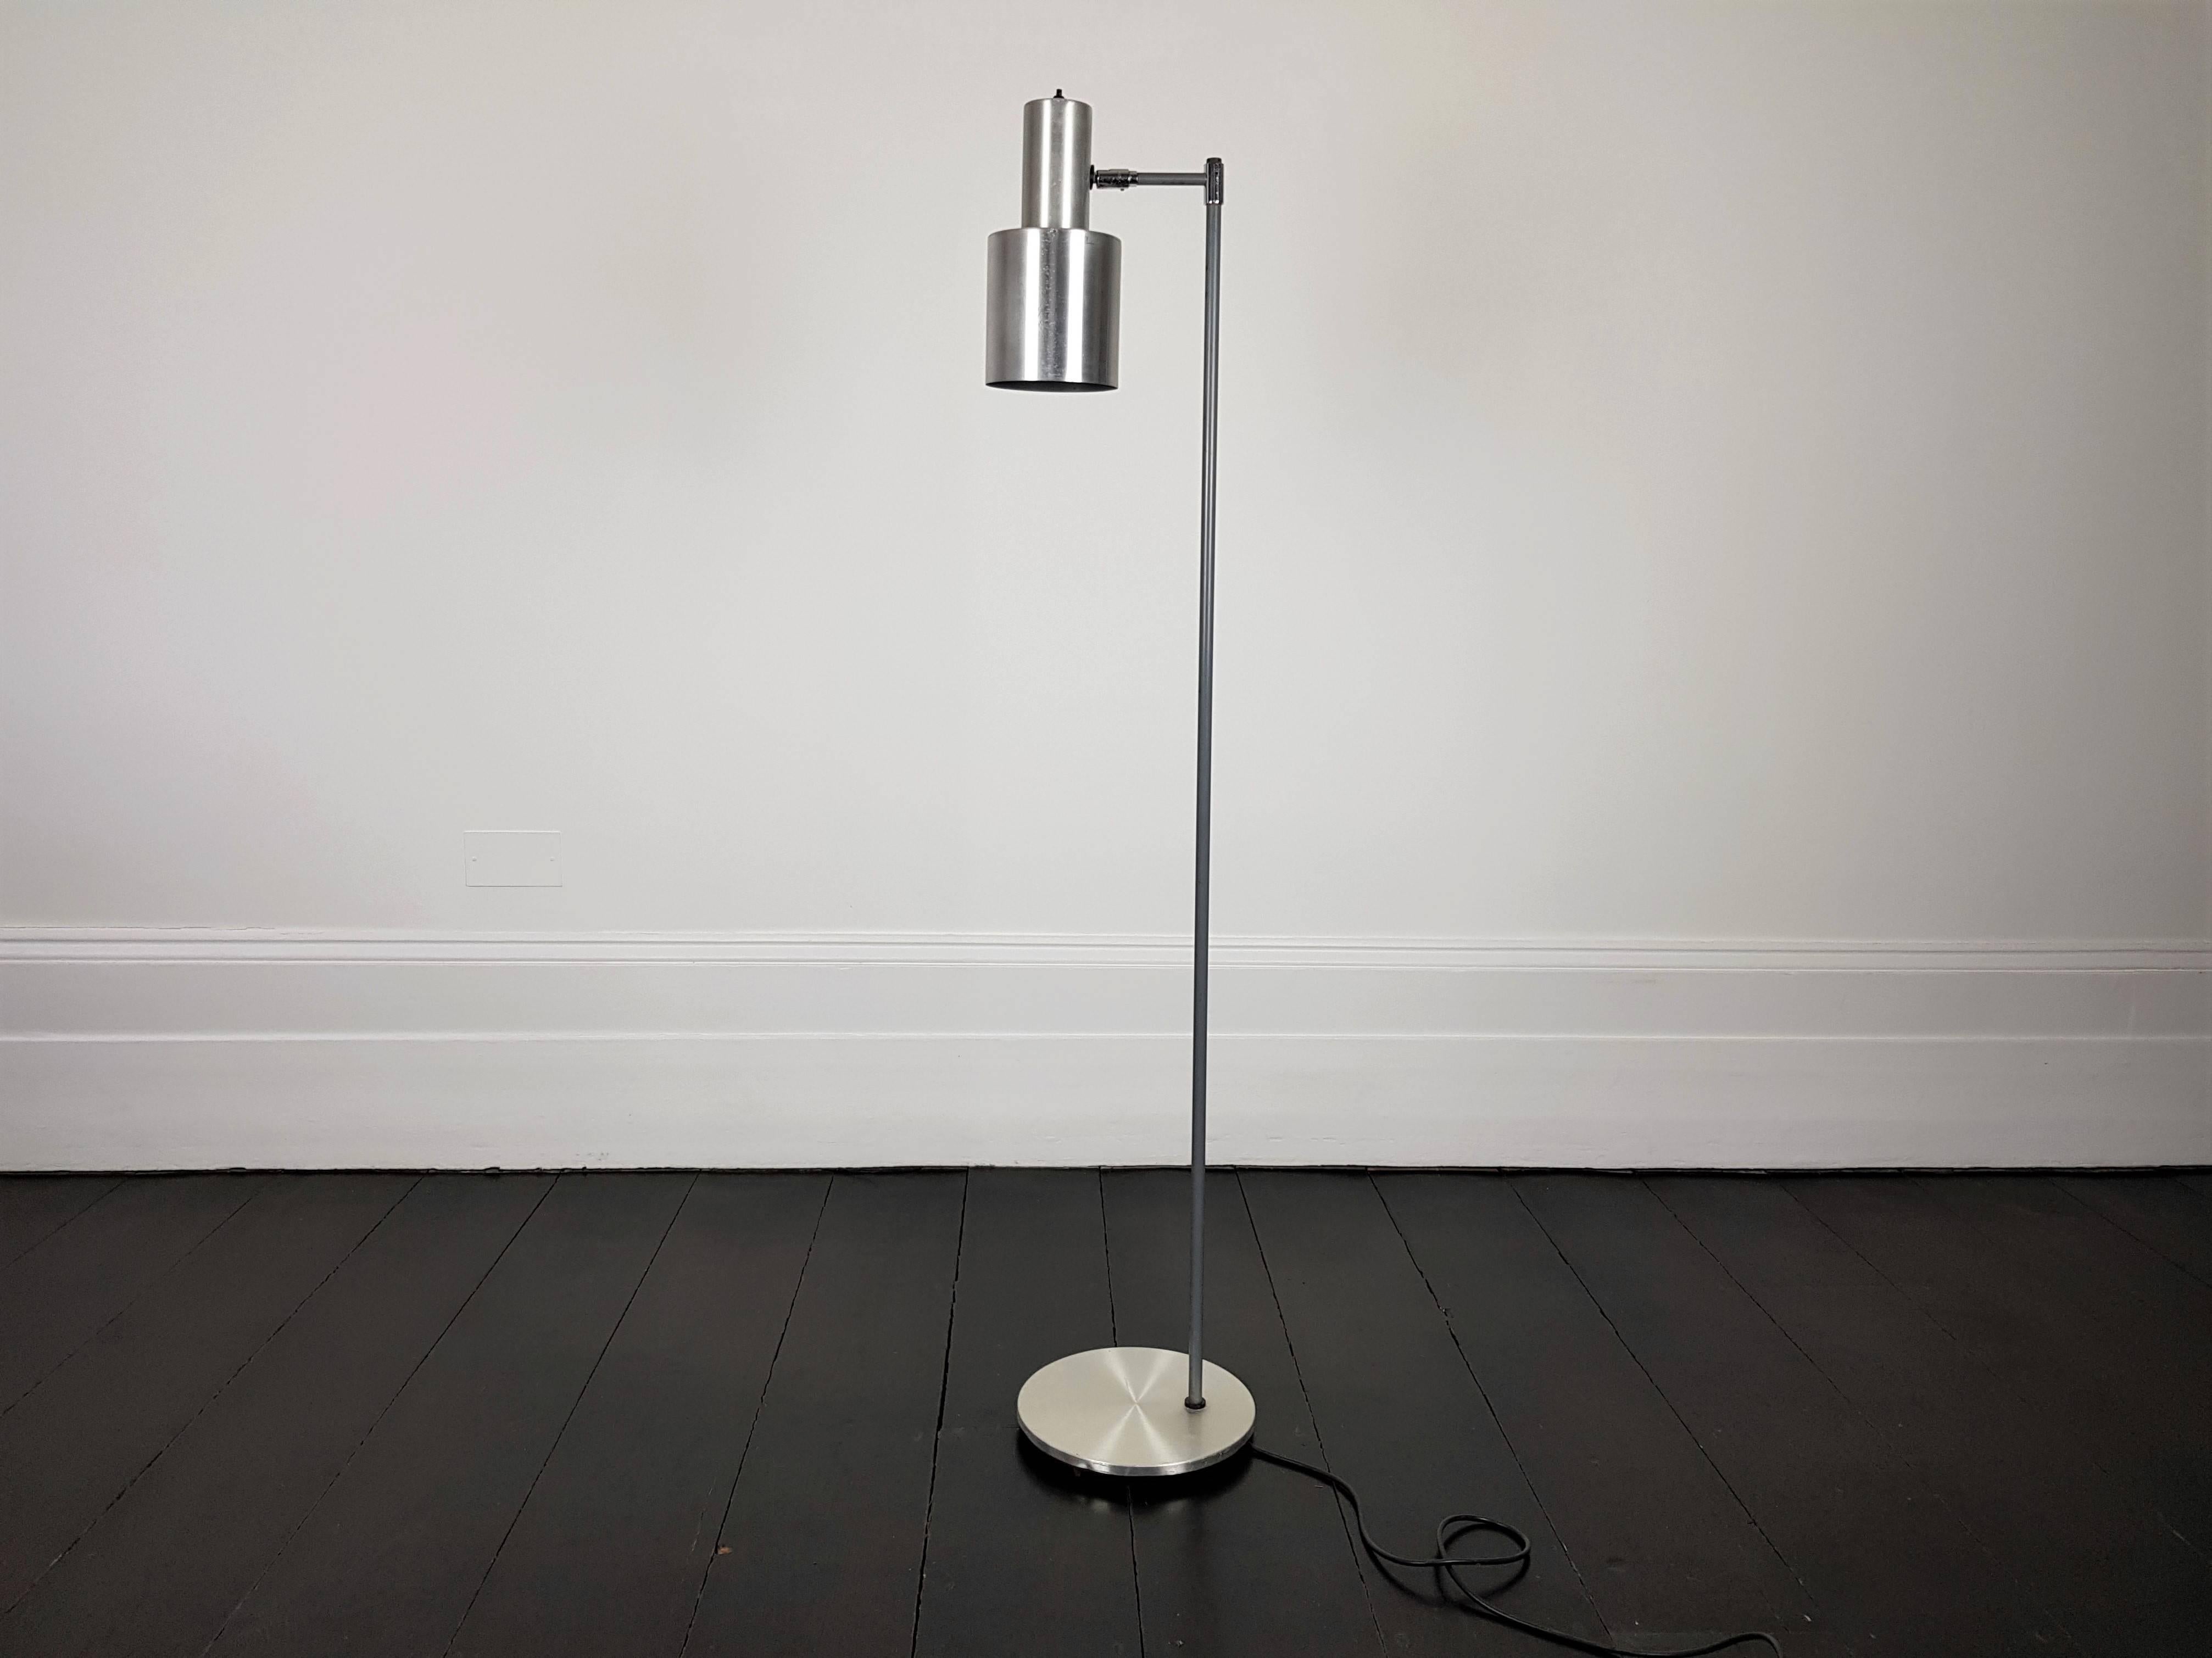 Aluminium 'Studio' floor lamp. Designed by Jo Hammerborg for Fog & Mørup and released in the 1960s.

In 1957 Hammerborg became head of design at Fog & Mørup. His incumbency in this role was to prove the most successful period in the company’s